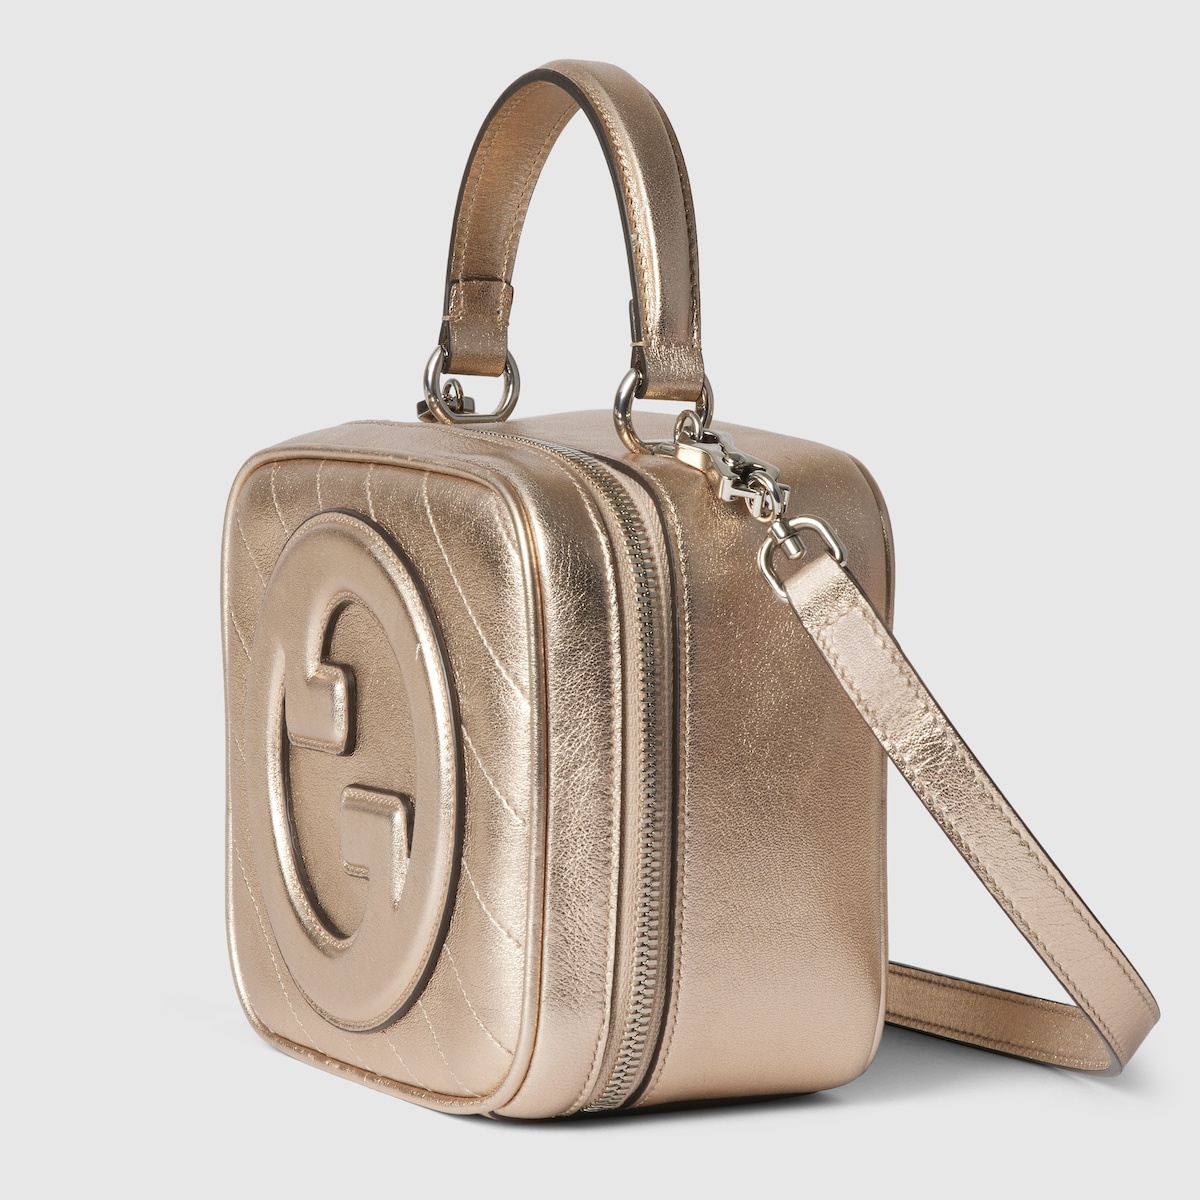 Gucci Blondie small top handle bag - 1